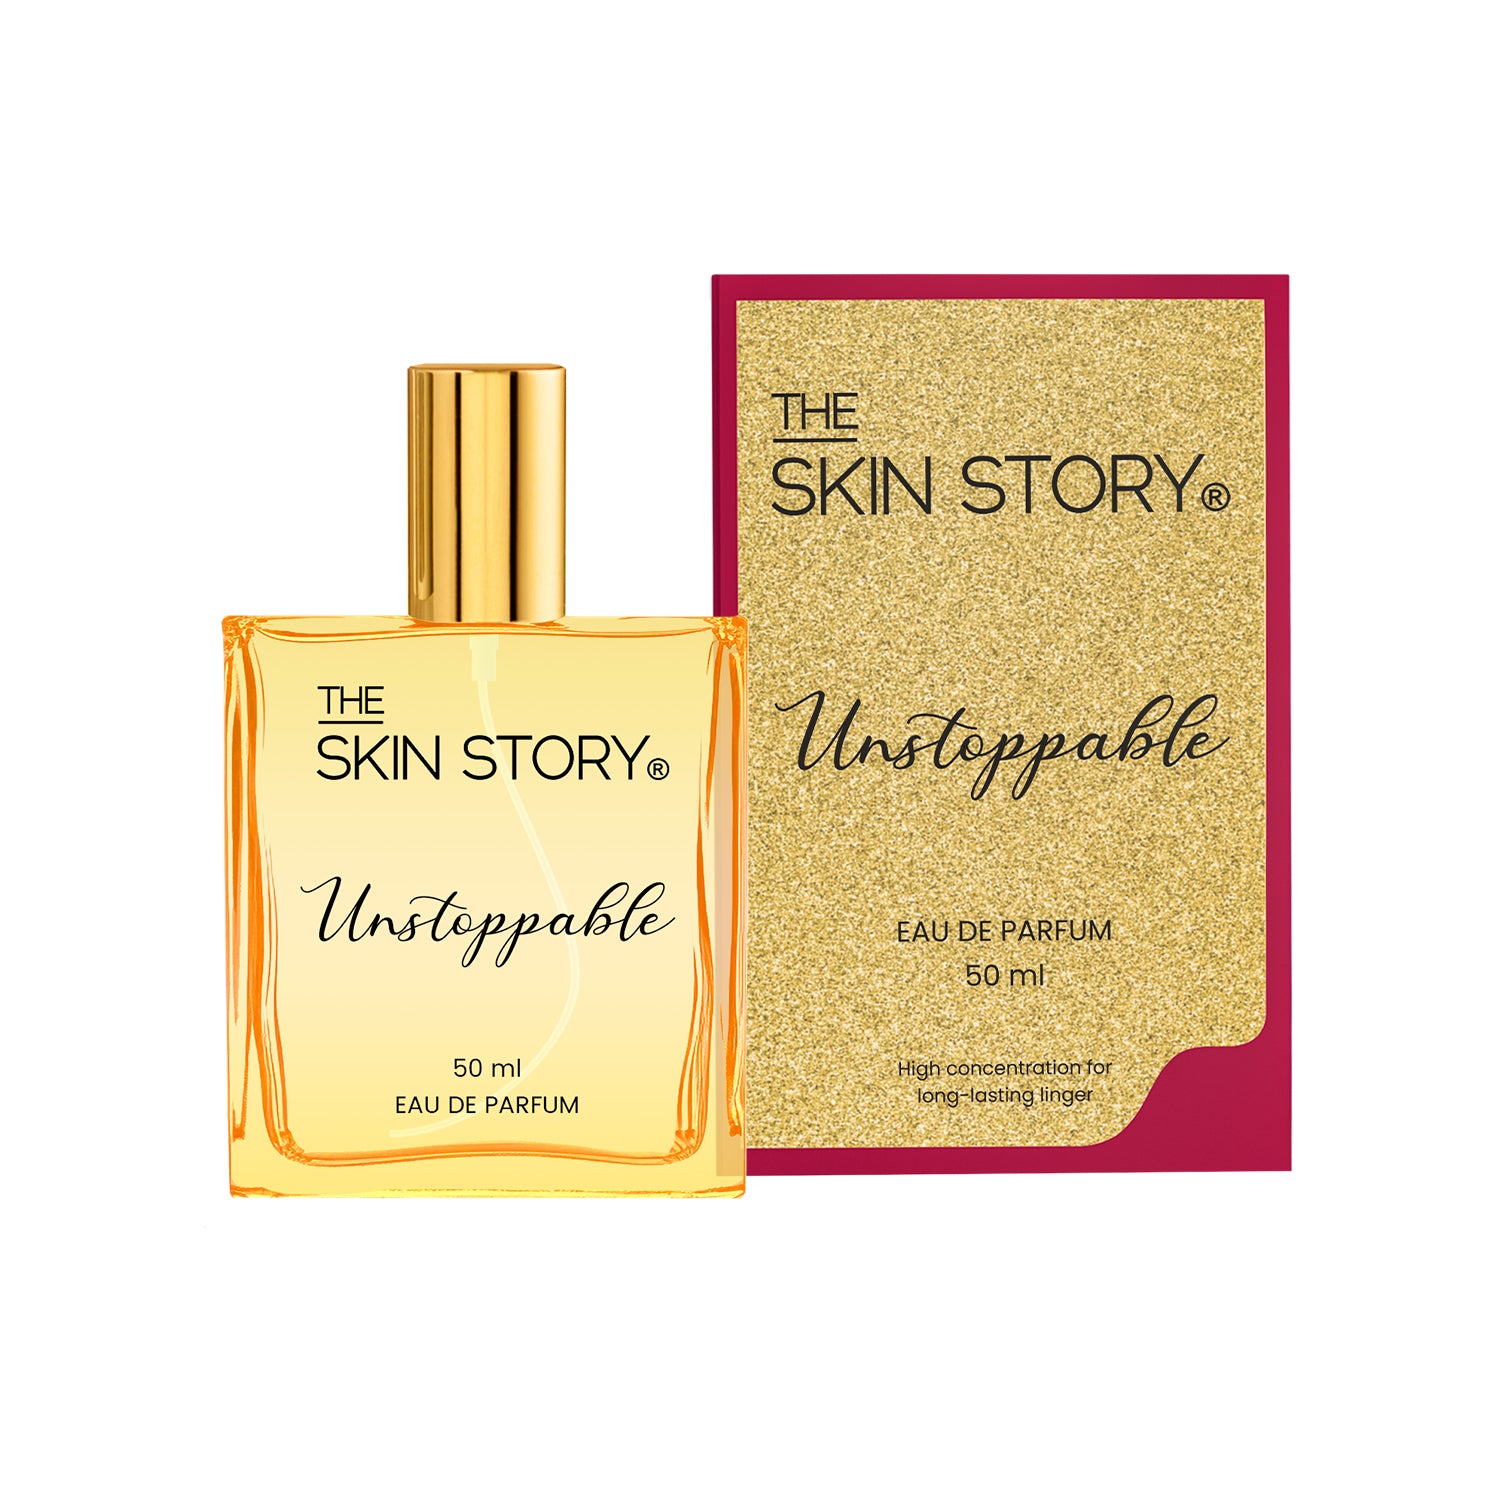 The Skin Story Unstoppable, 50ml